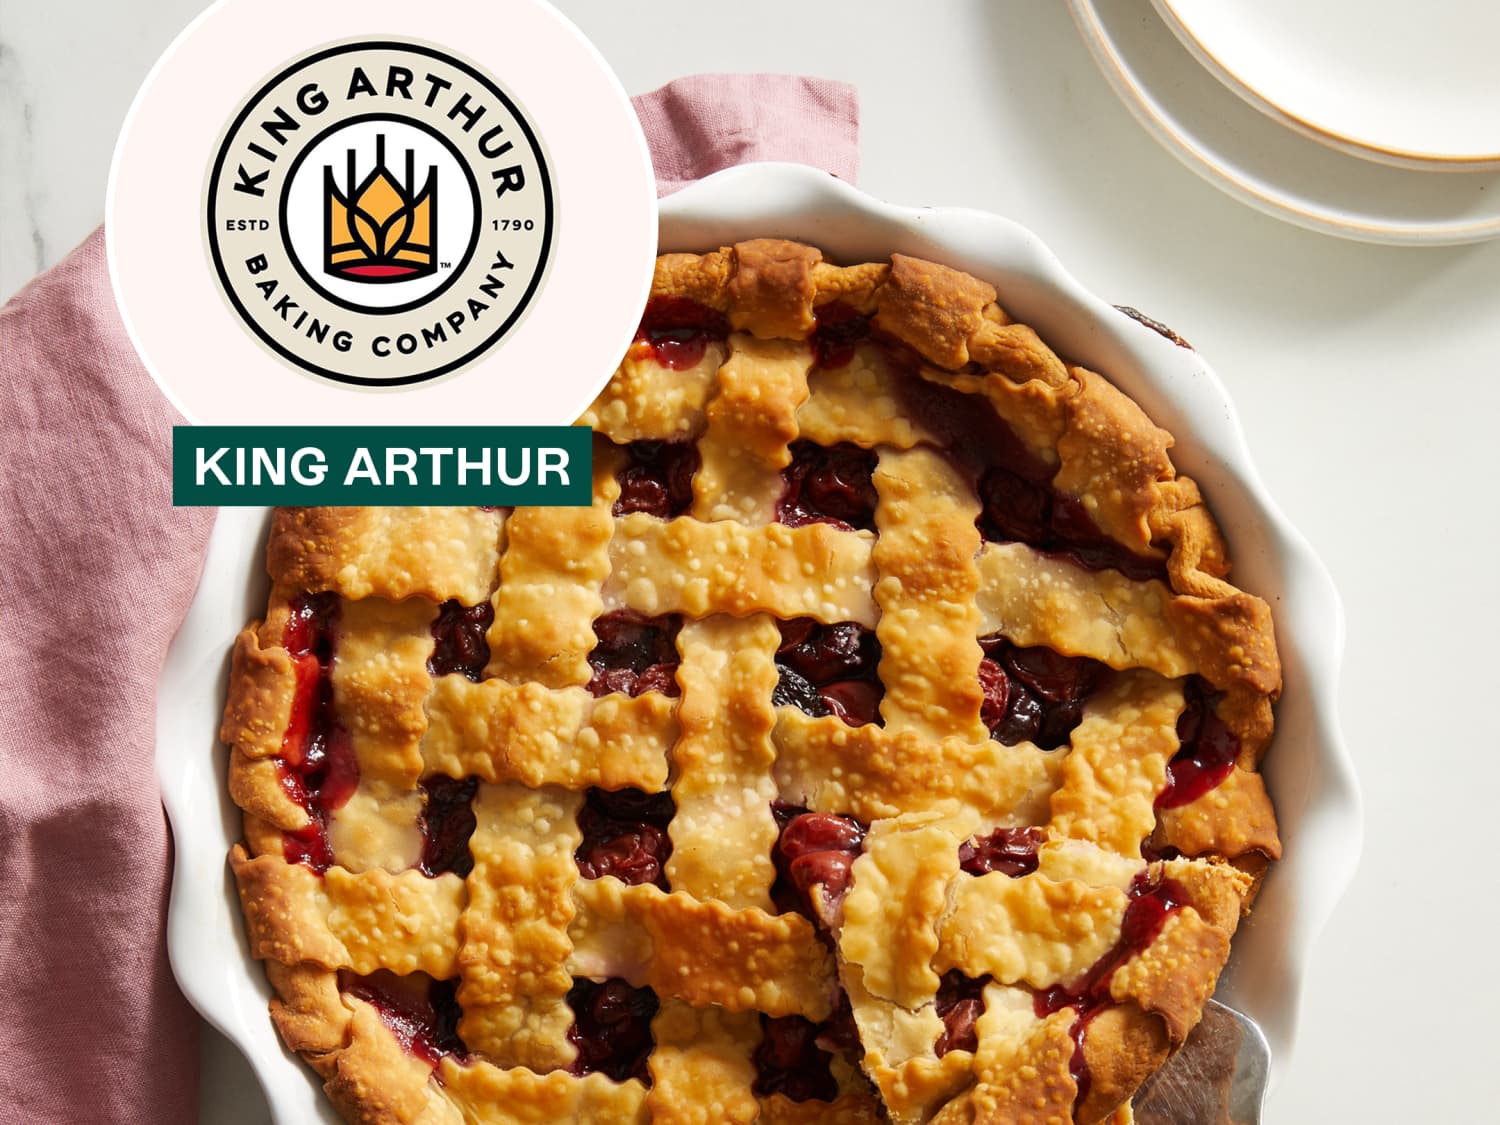 King Arthur Baking Company on Instagram: We put our reputation on the line  when we assure you that this Melted Butter Pie Crust recipe is quick,  dependable, AND doesn't require rolling out